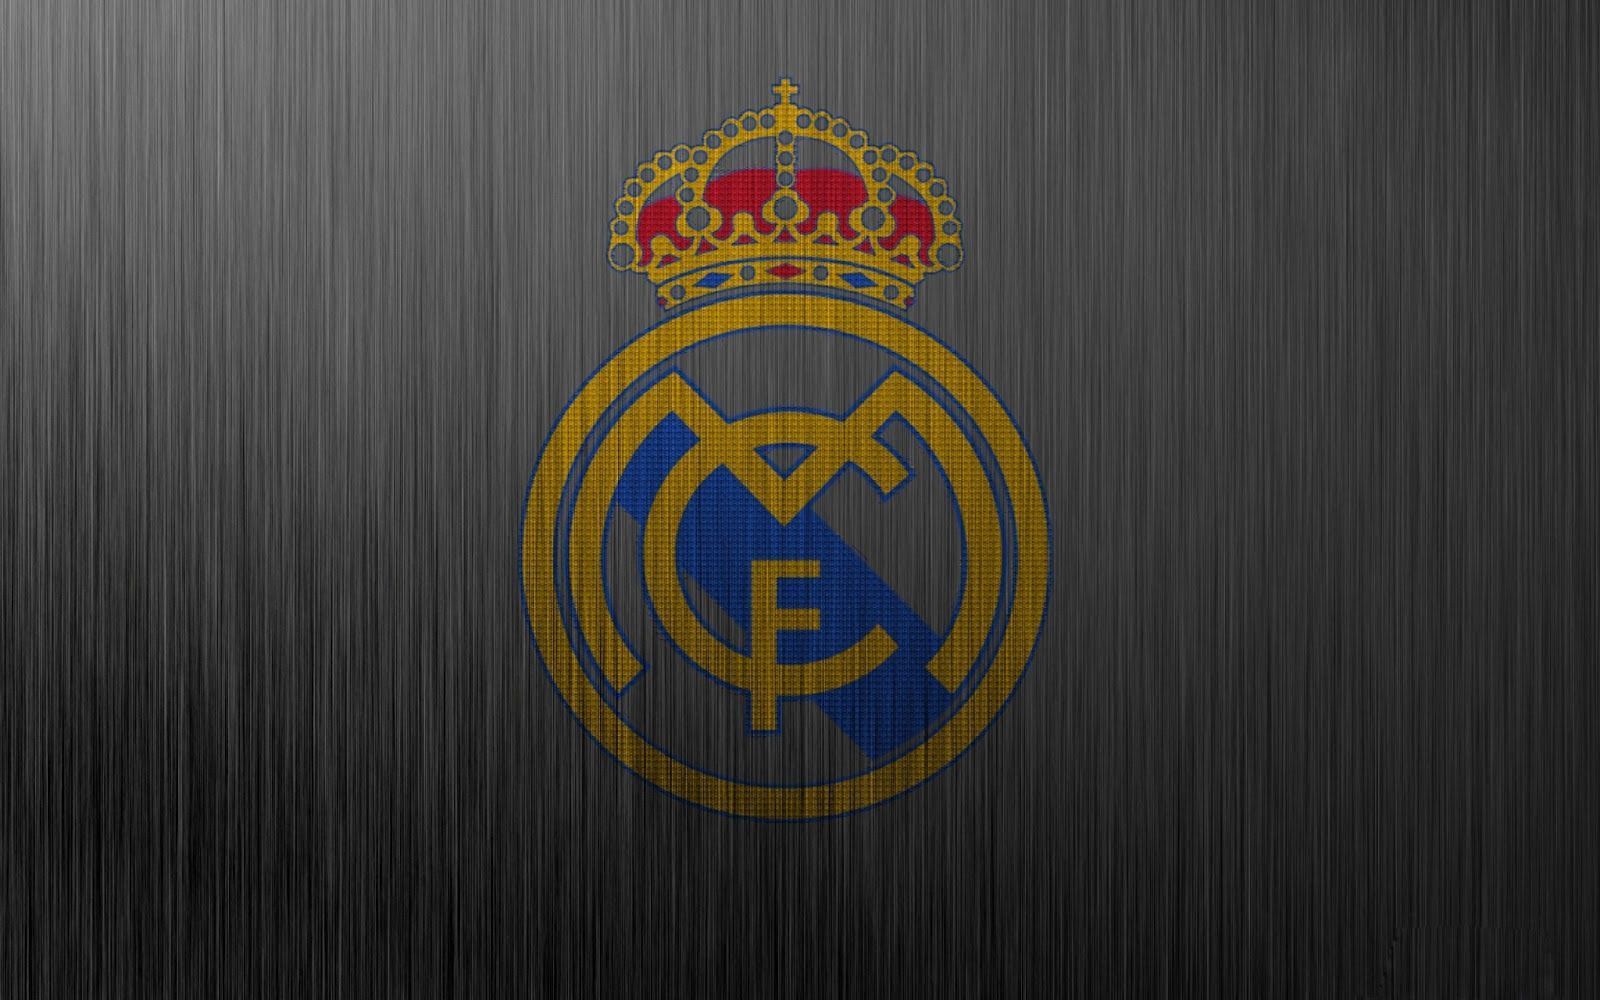 Gallery for - free download wallpaper real madrid fc